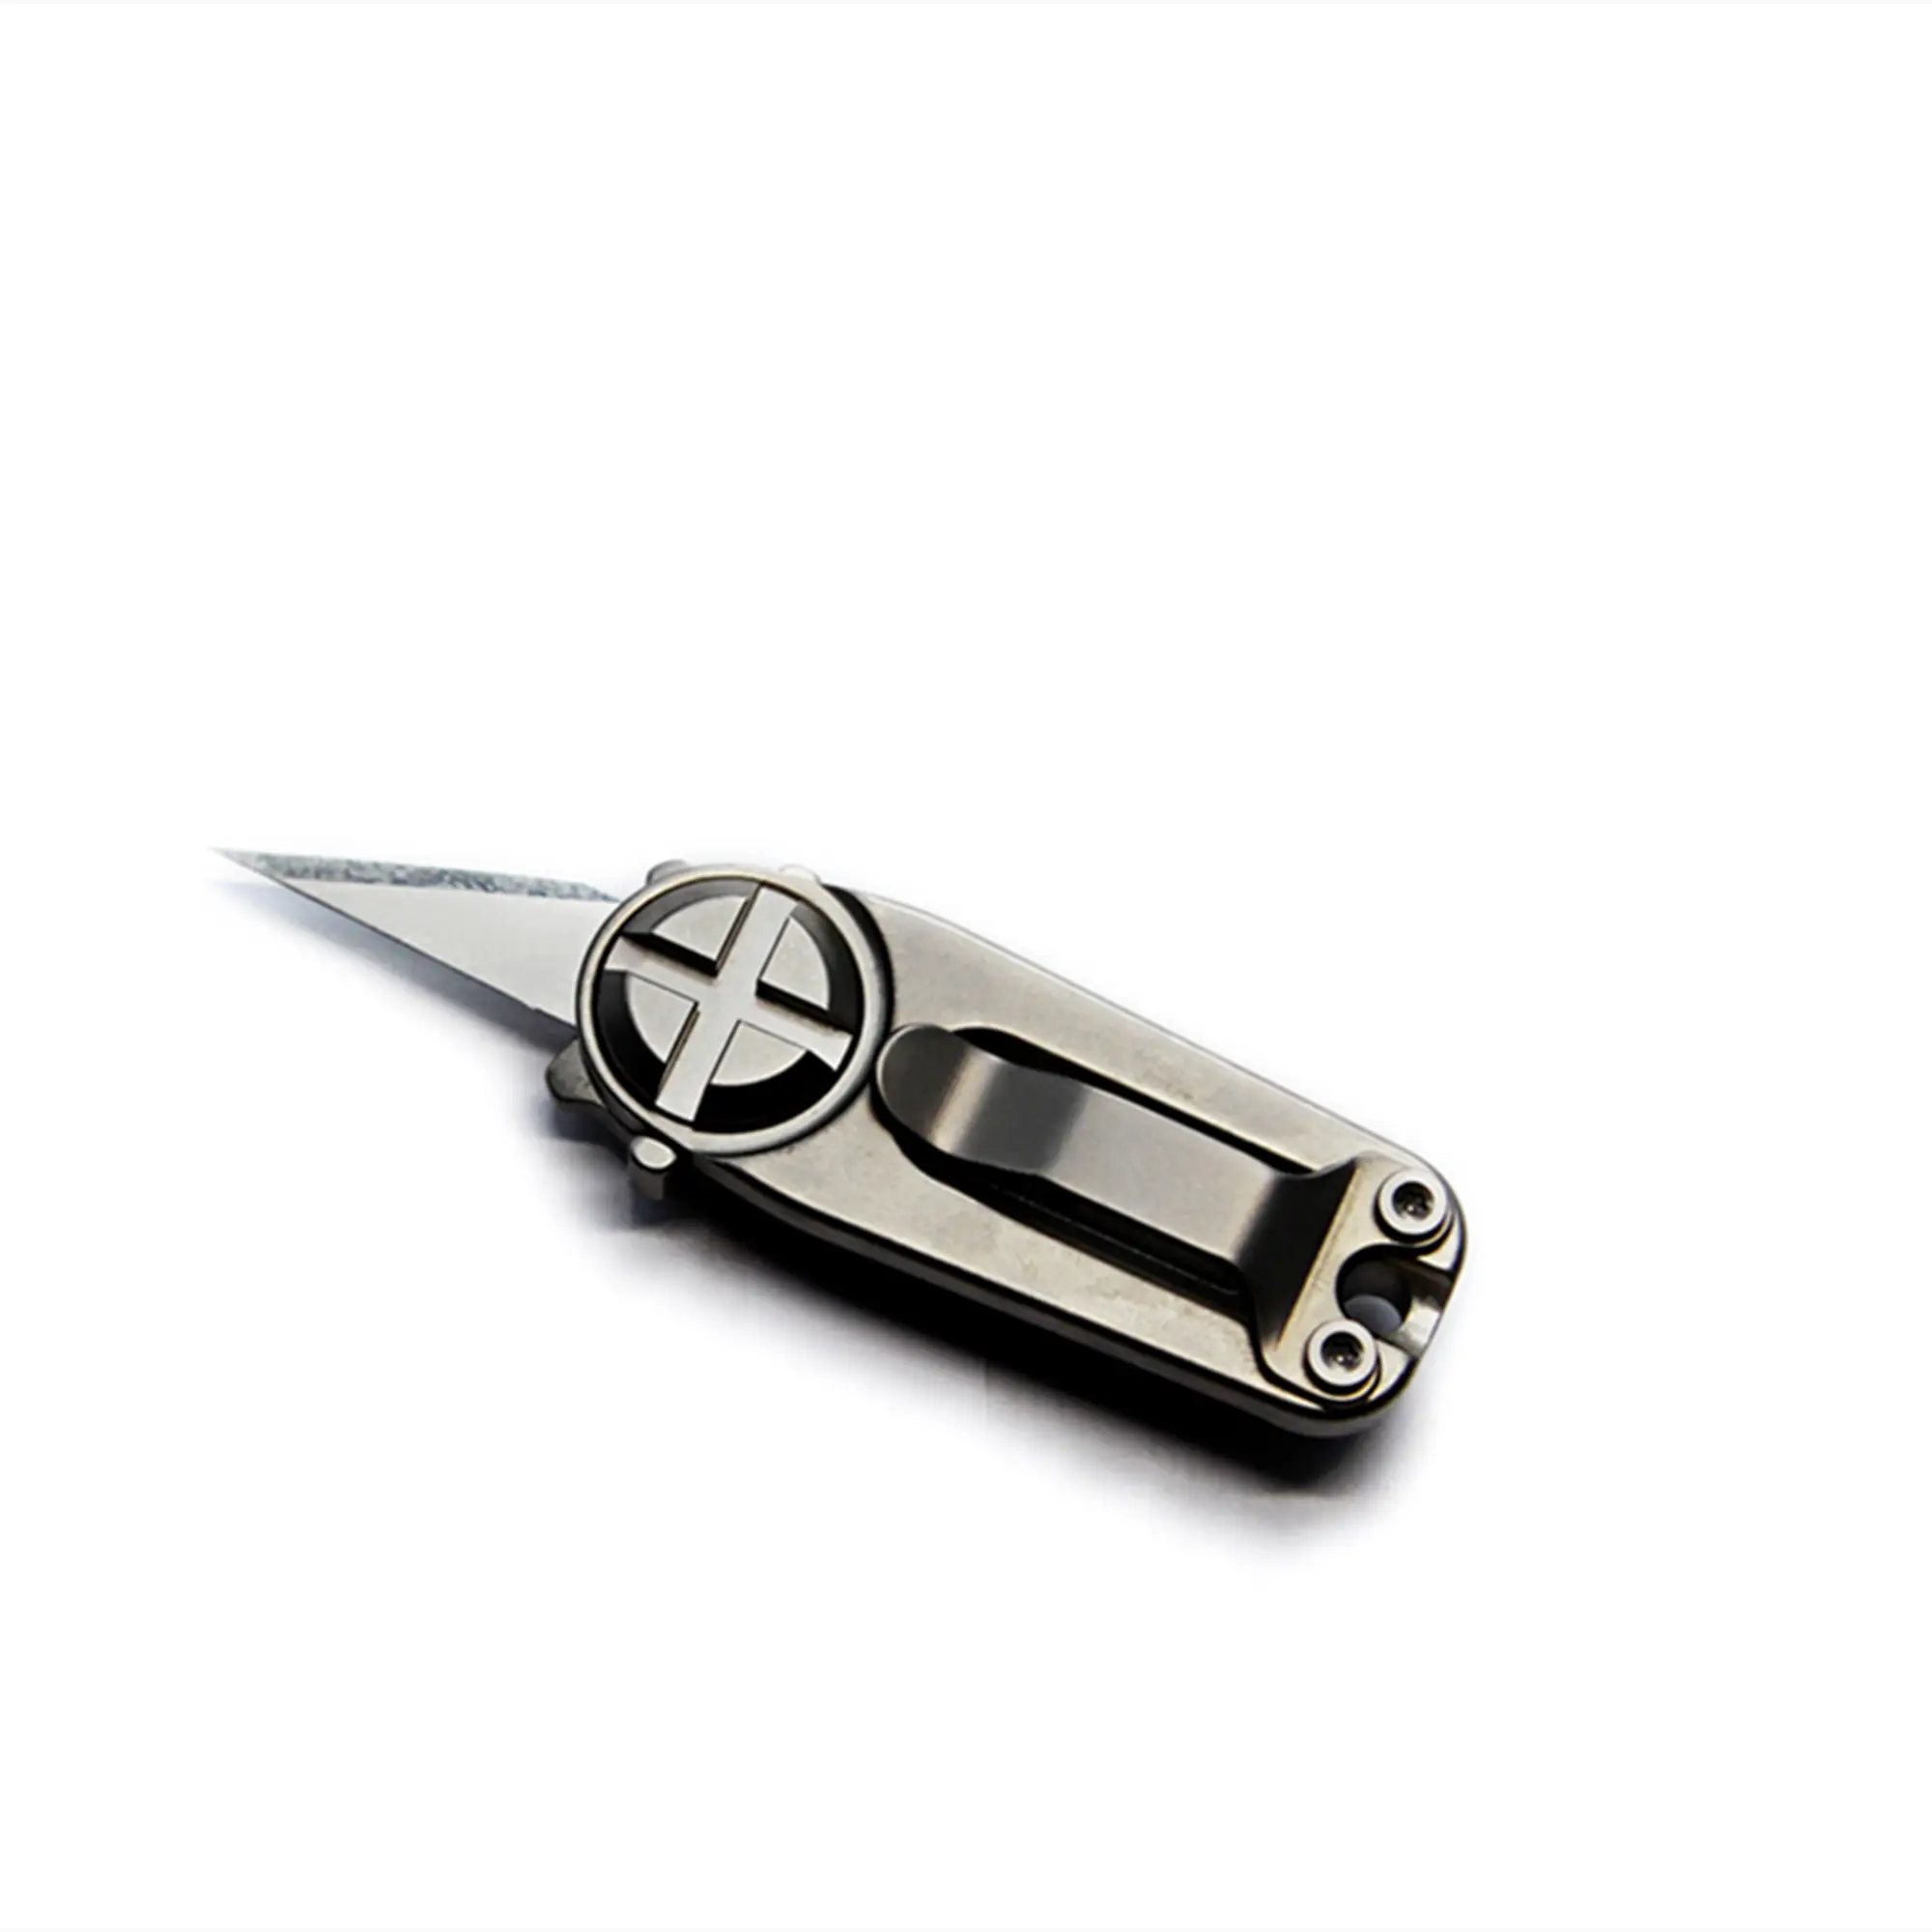 New Keychain Knife Multi Blades EDC Tools Titanium Gear Convenient Box Opener Wallet Tool For Men Outdoor Survival Kit